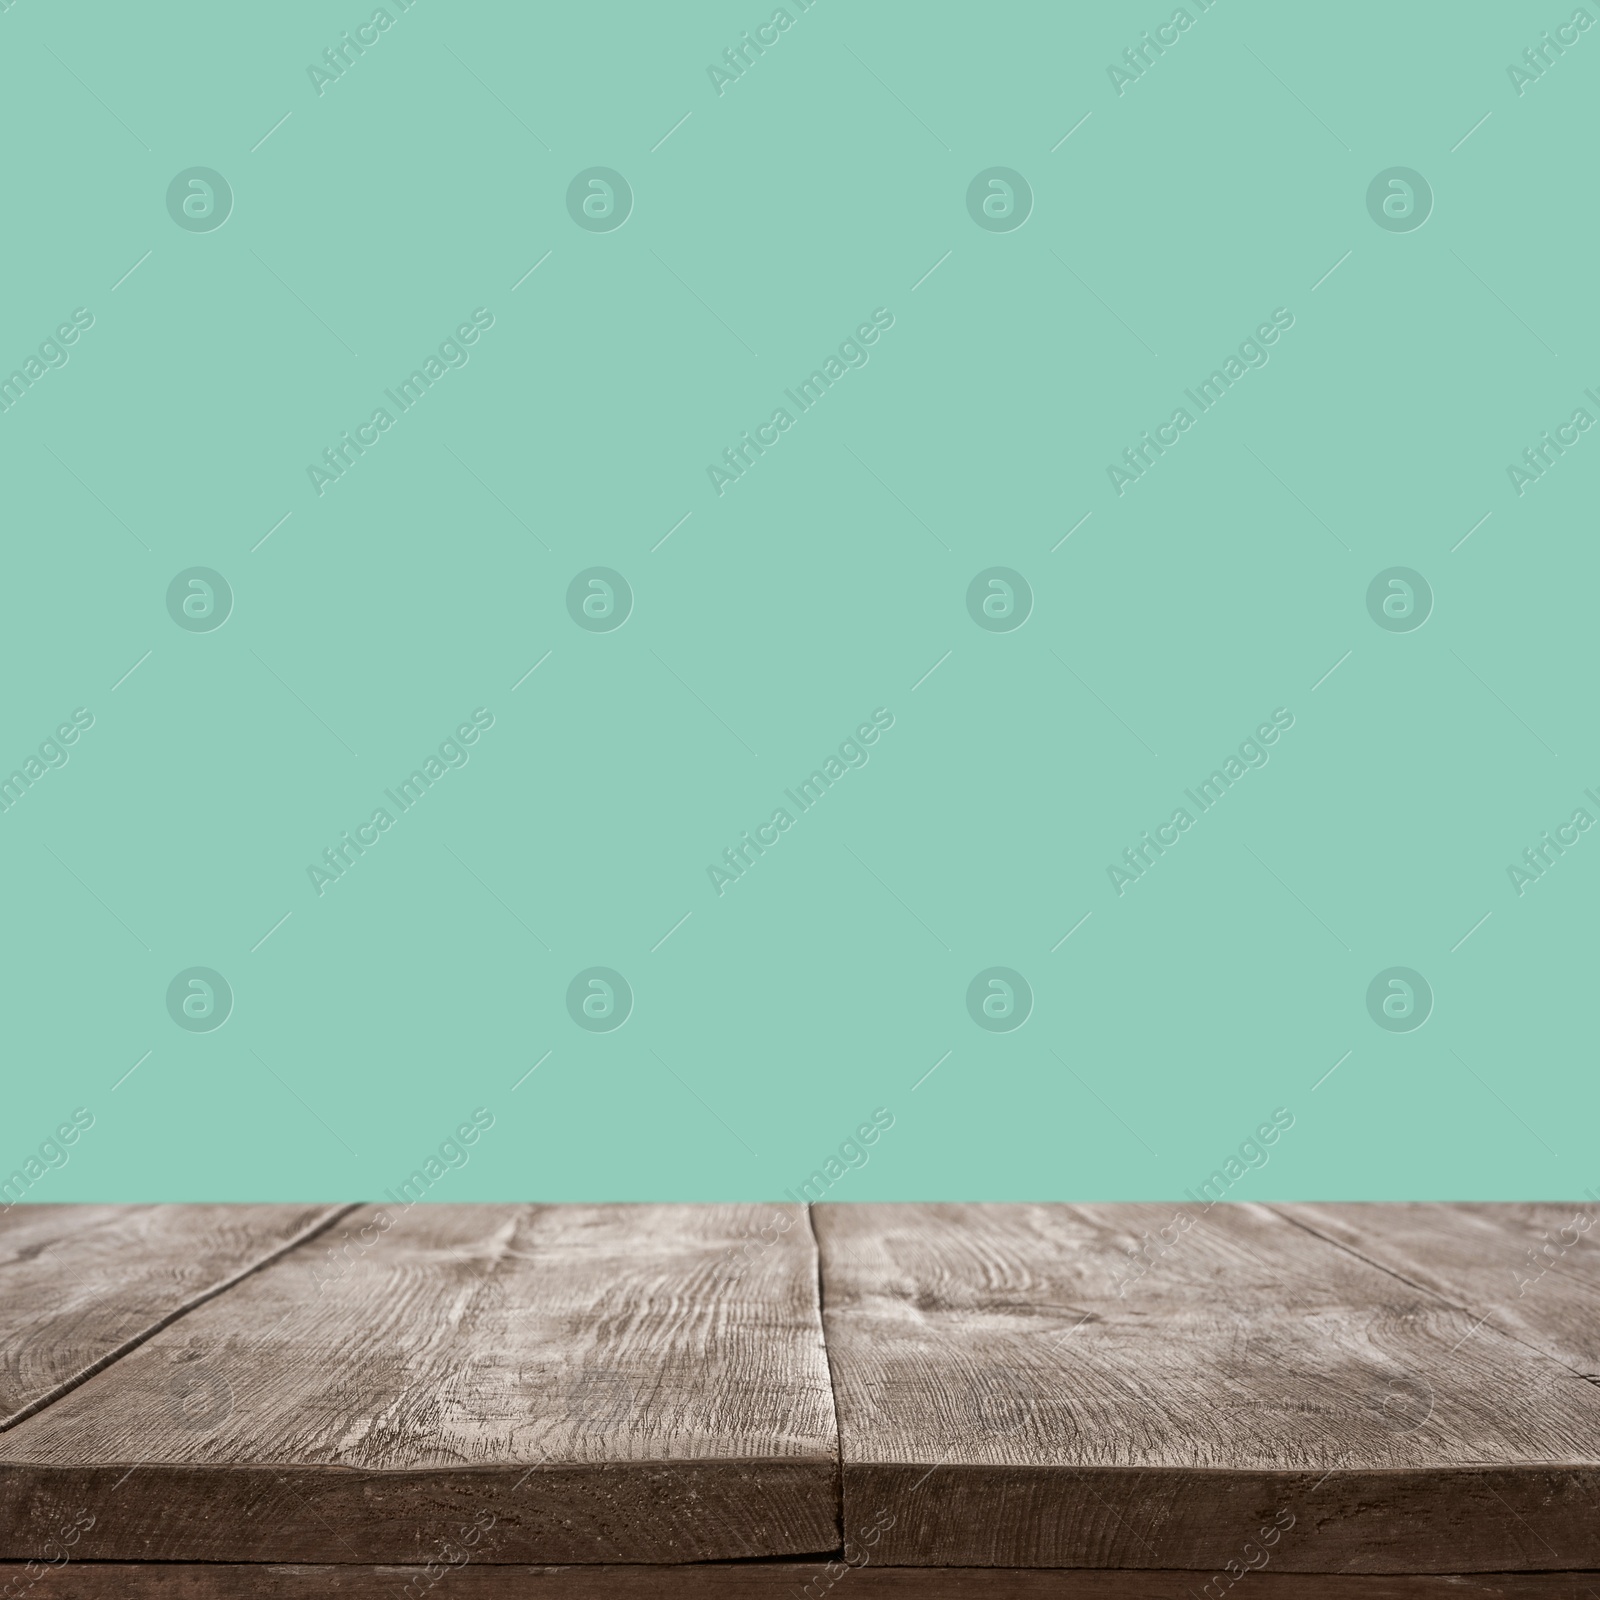 Image of Empty wooden surface on mint background. Mockup for design